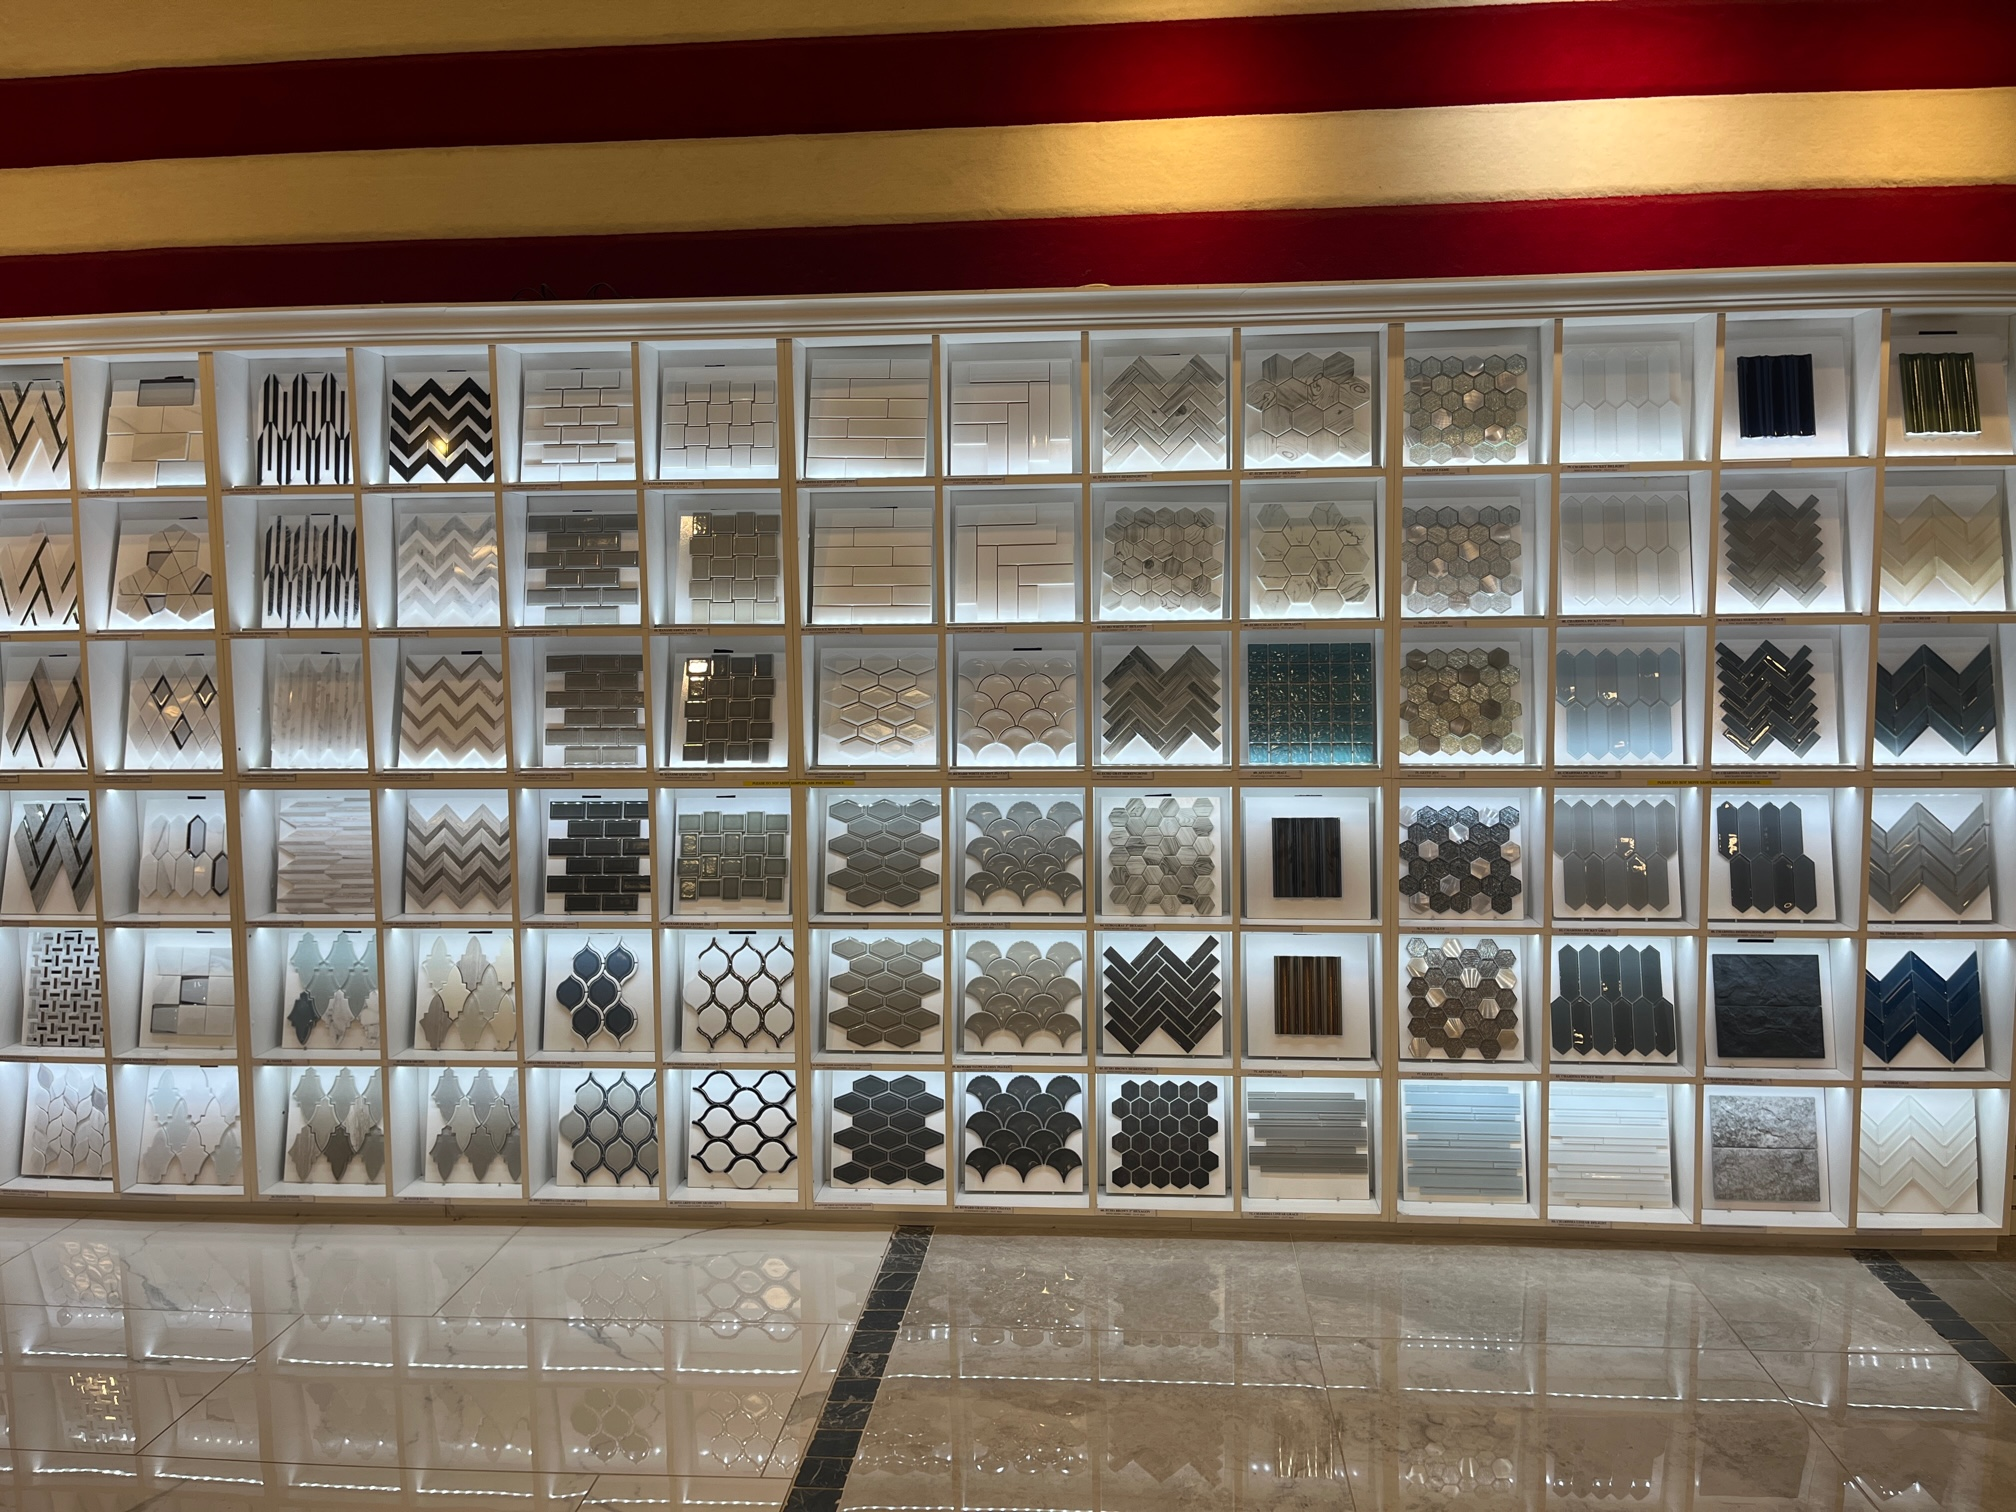 Have You Seen Our Backsplash Display In Person?